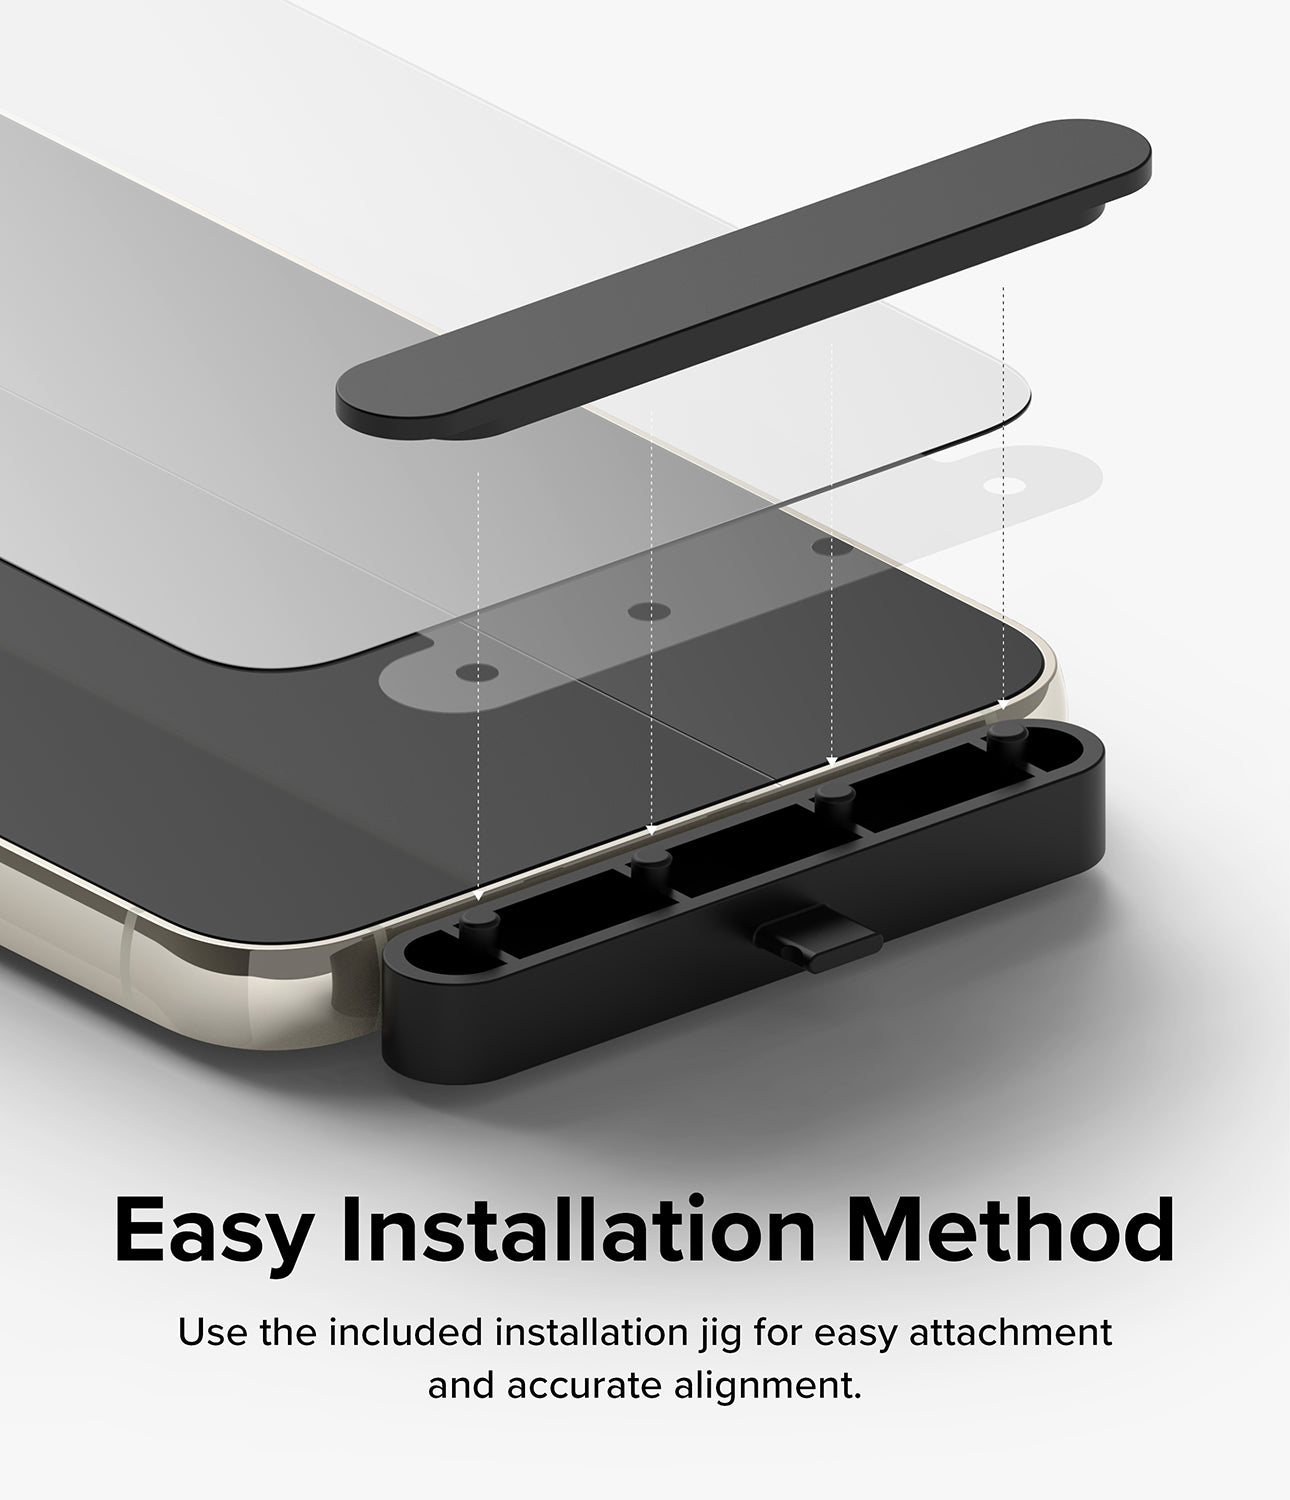 Easy Installation Method l Use the included installation jig for easy attachment and accurate alignment.